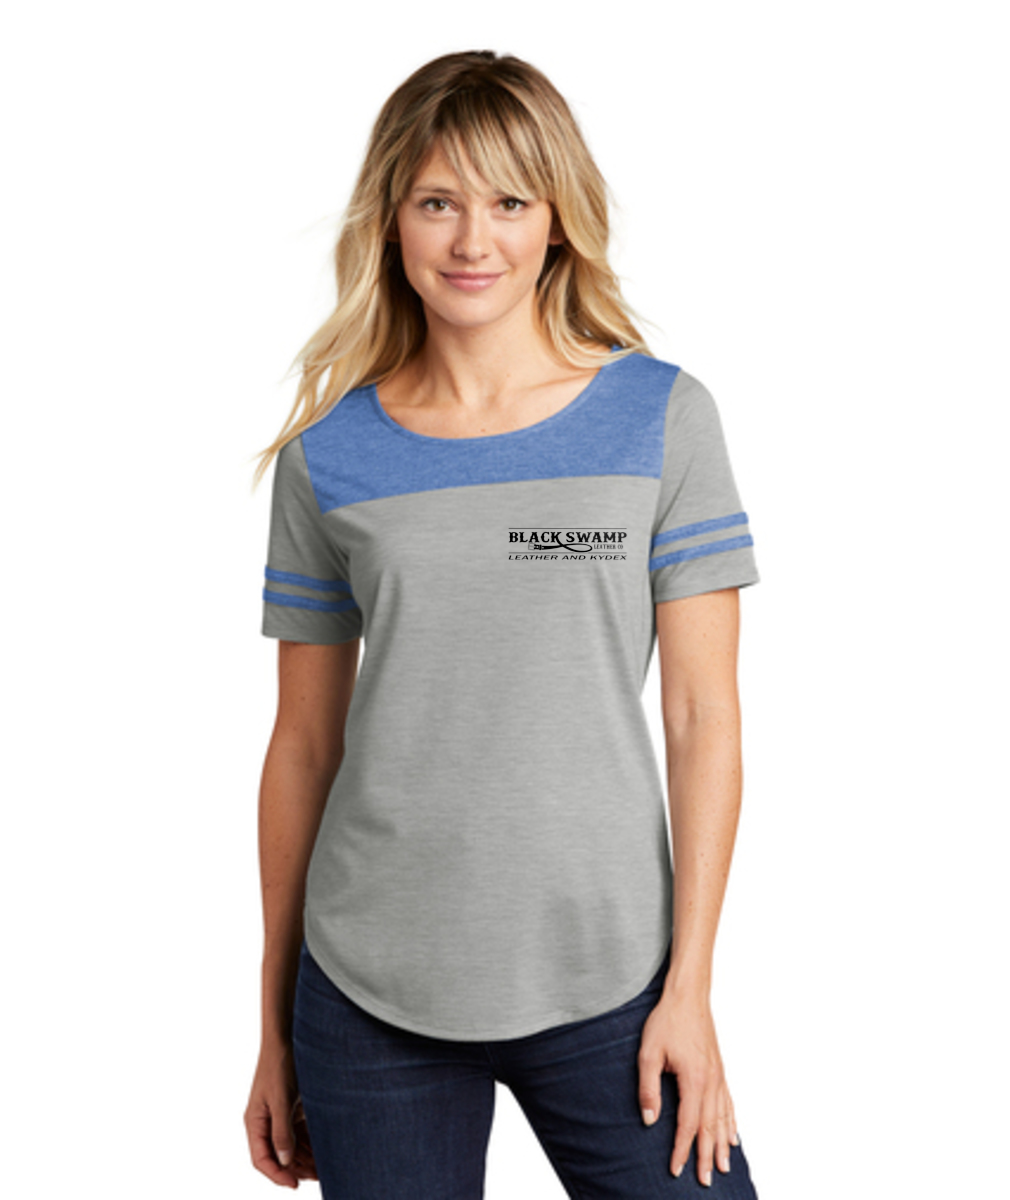 Women's Embroidered Tri-Blend Fan T-Shirt with black thread - Black Swamp Leather Company